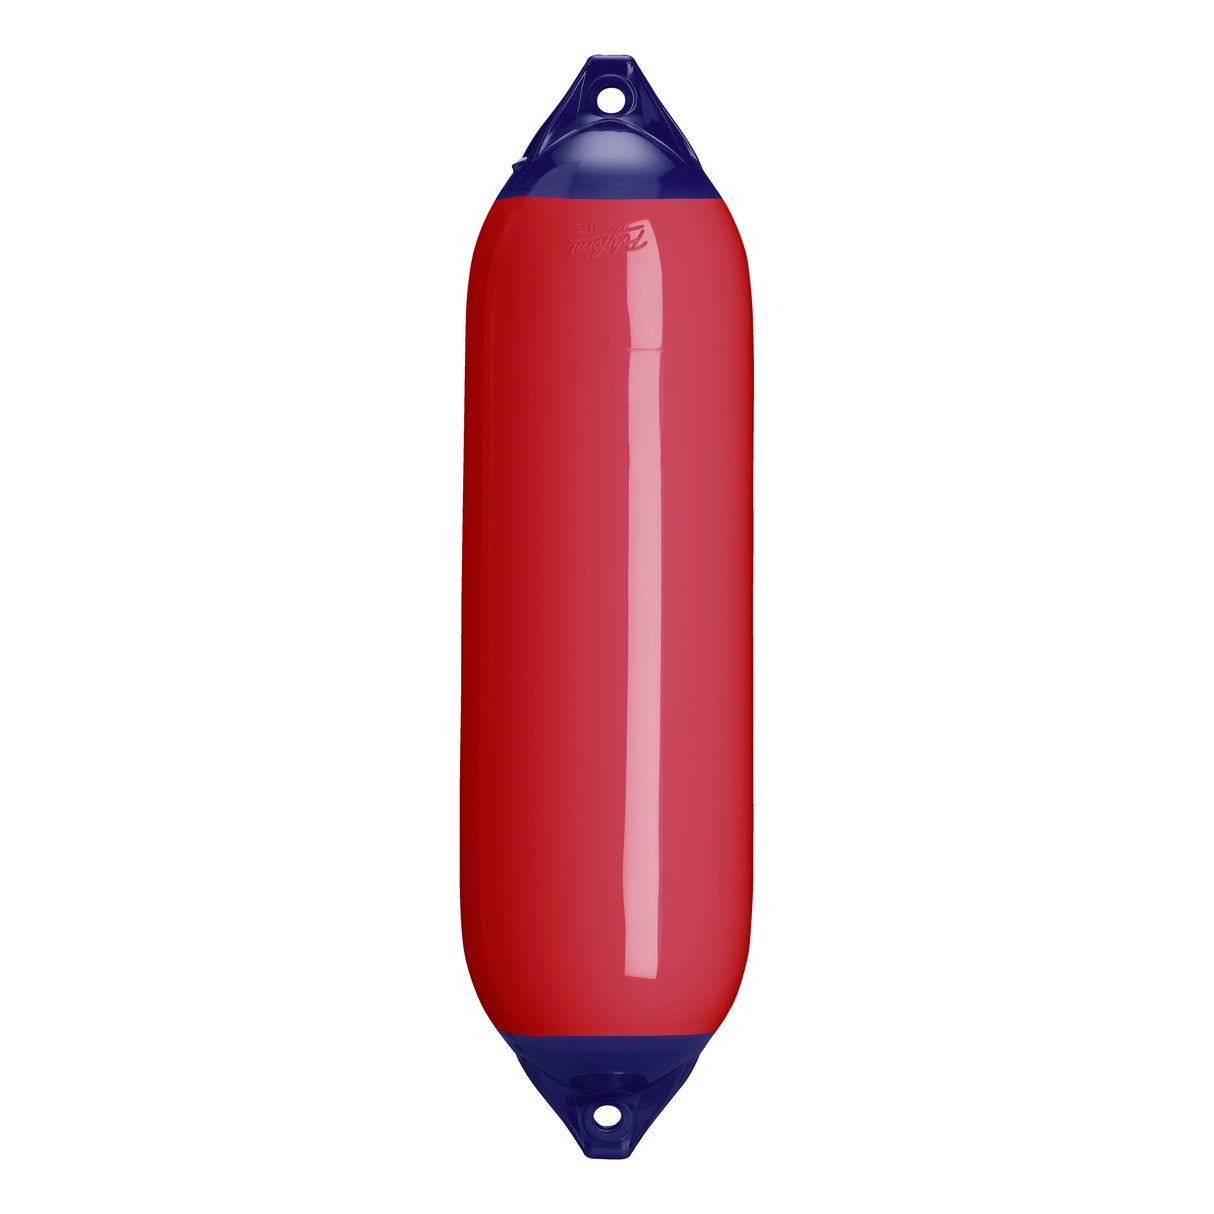 Classic Red boat fender with Navy-Top, Polyform F-6 